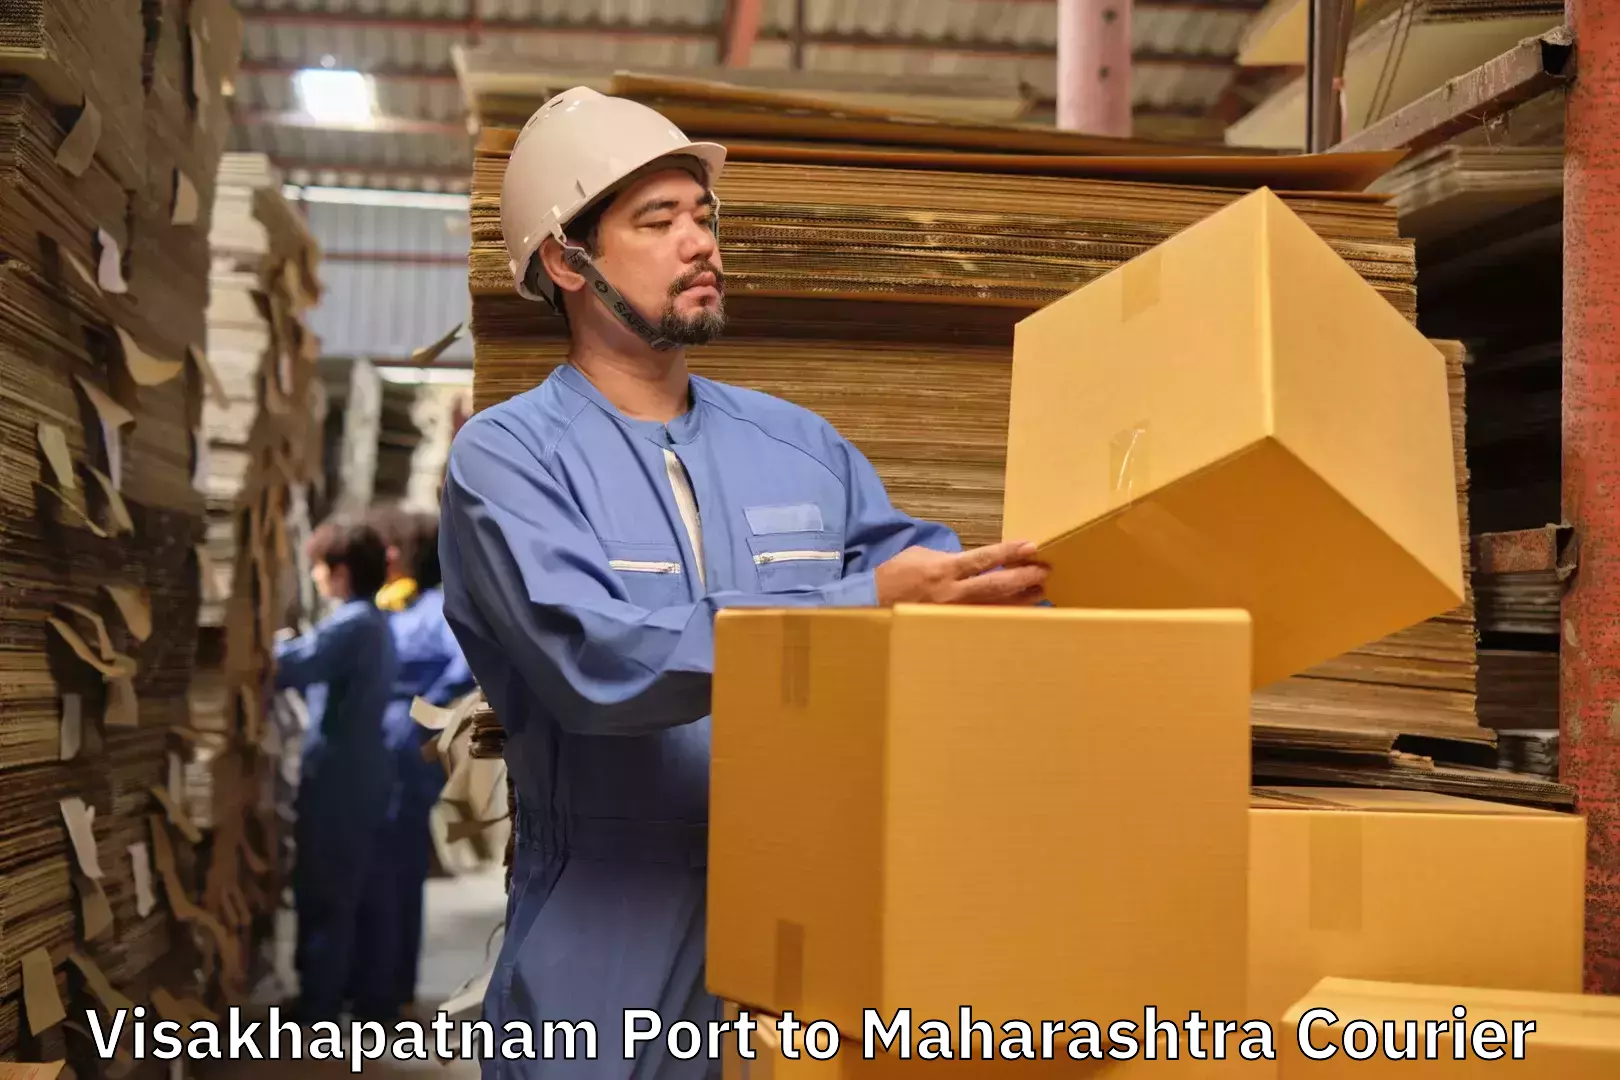 Reliable luggage courier Visakhapatnam Port to Morshi